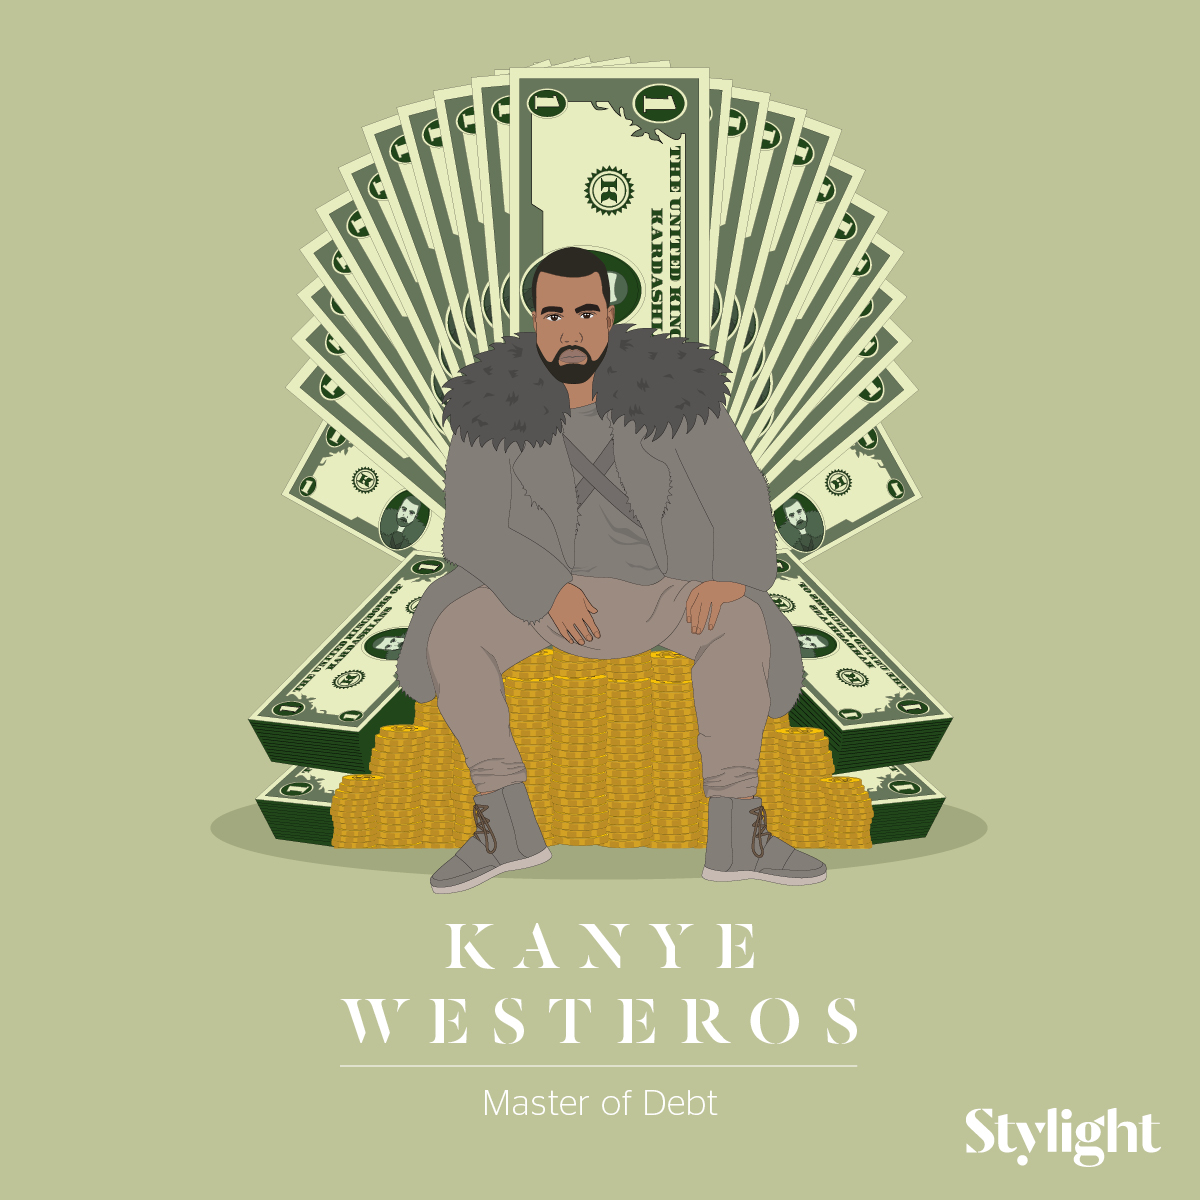 Kanye West - Game of Style (Stylight)